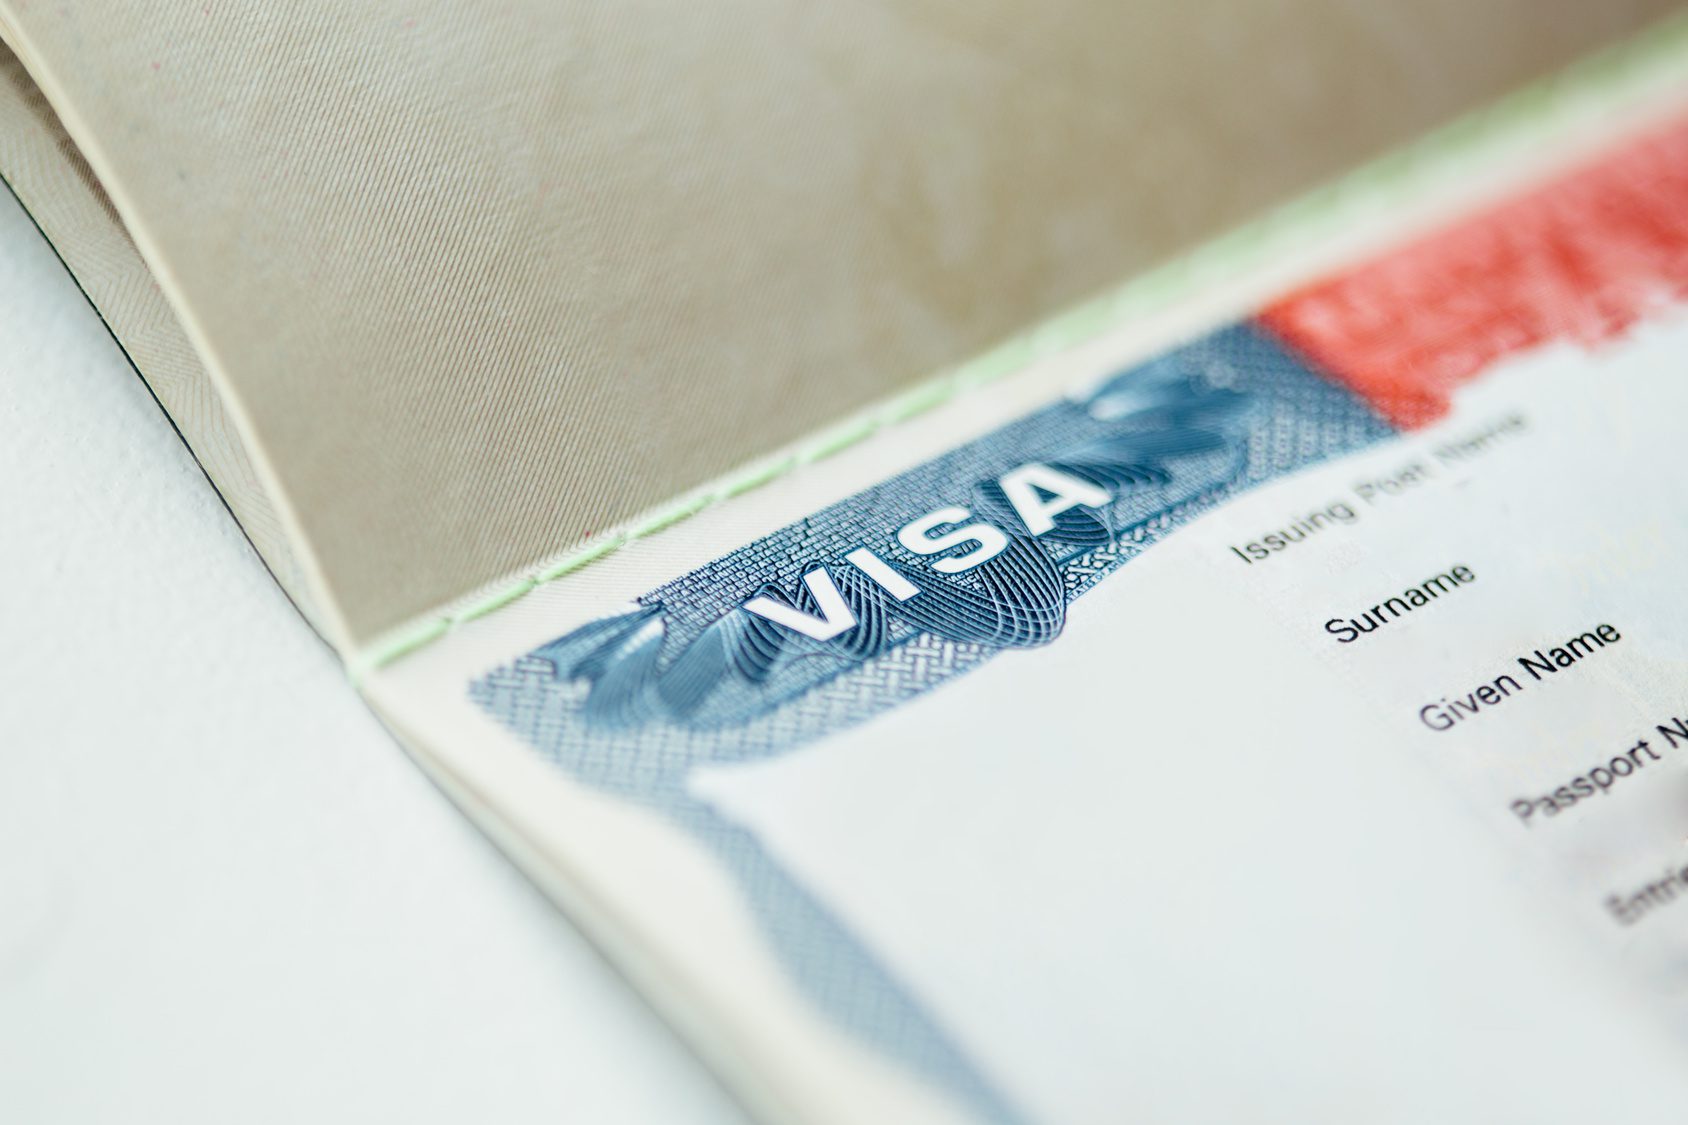 USCIS Implements Fee Increase for H-1B and L-1 Visas